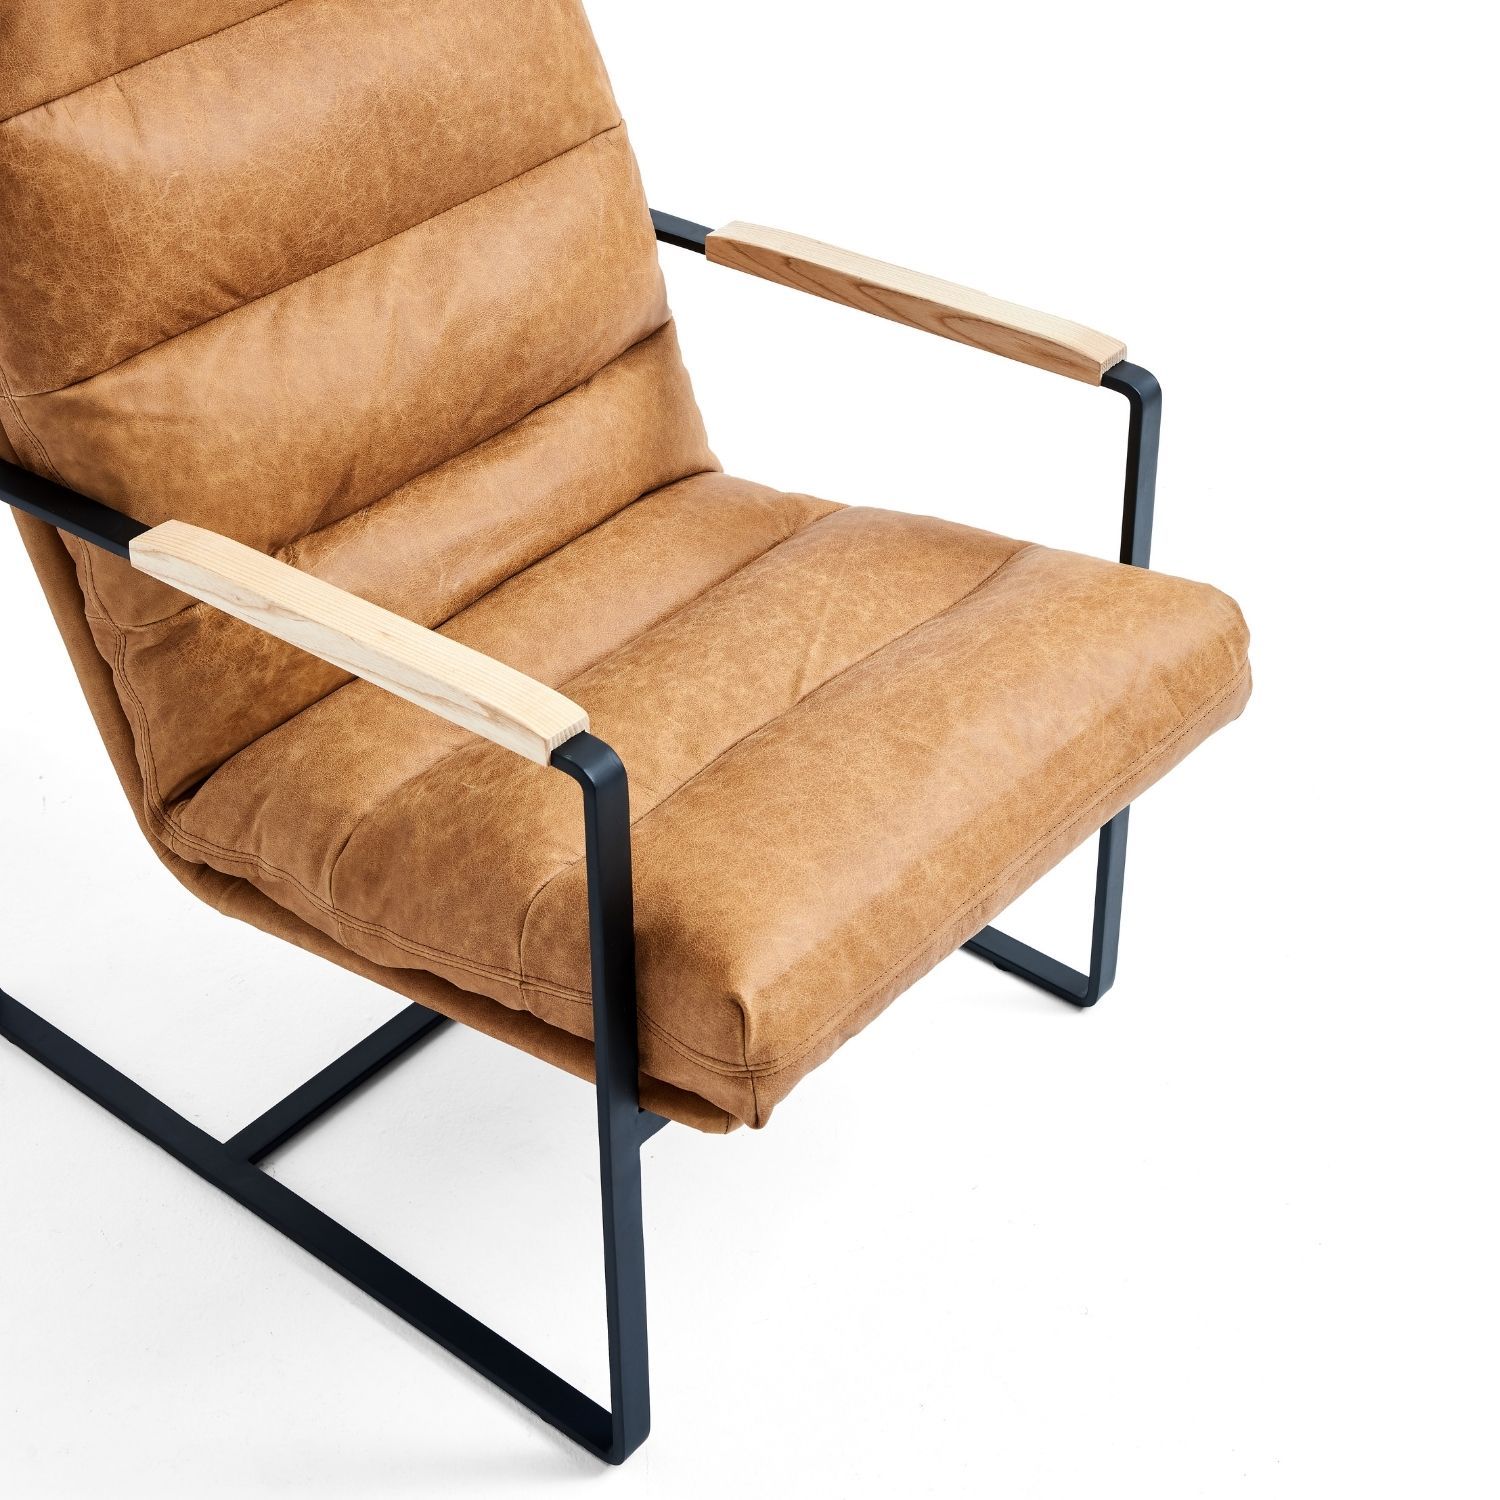 Rasche Lounge Chair with Ottoman Accent Chair Foundry 